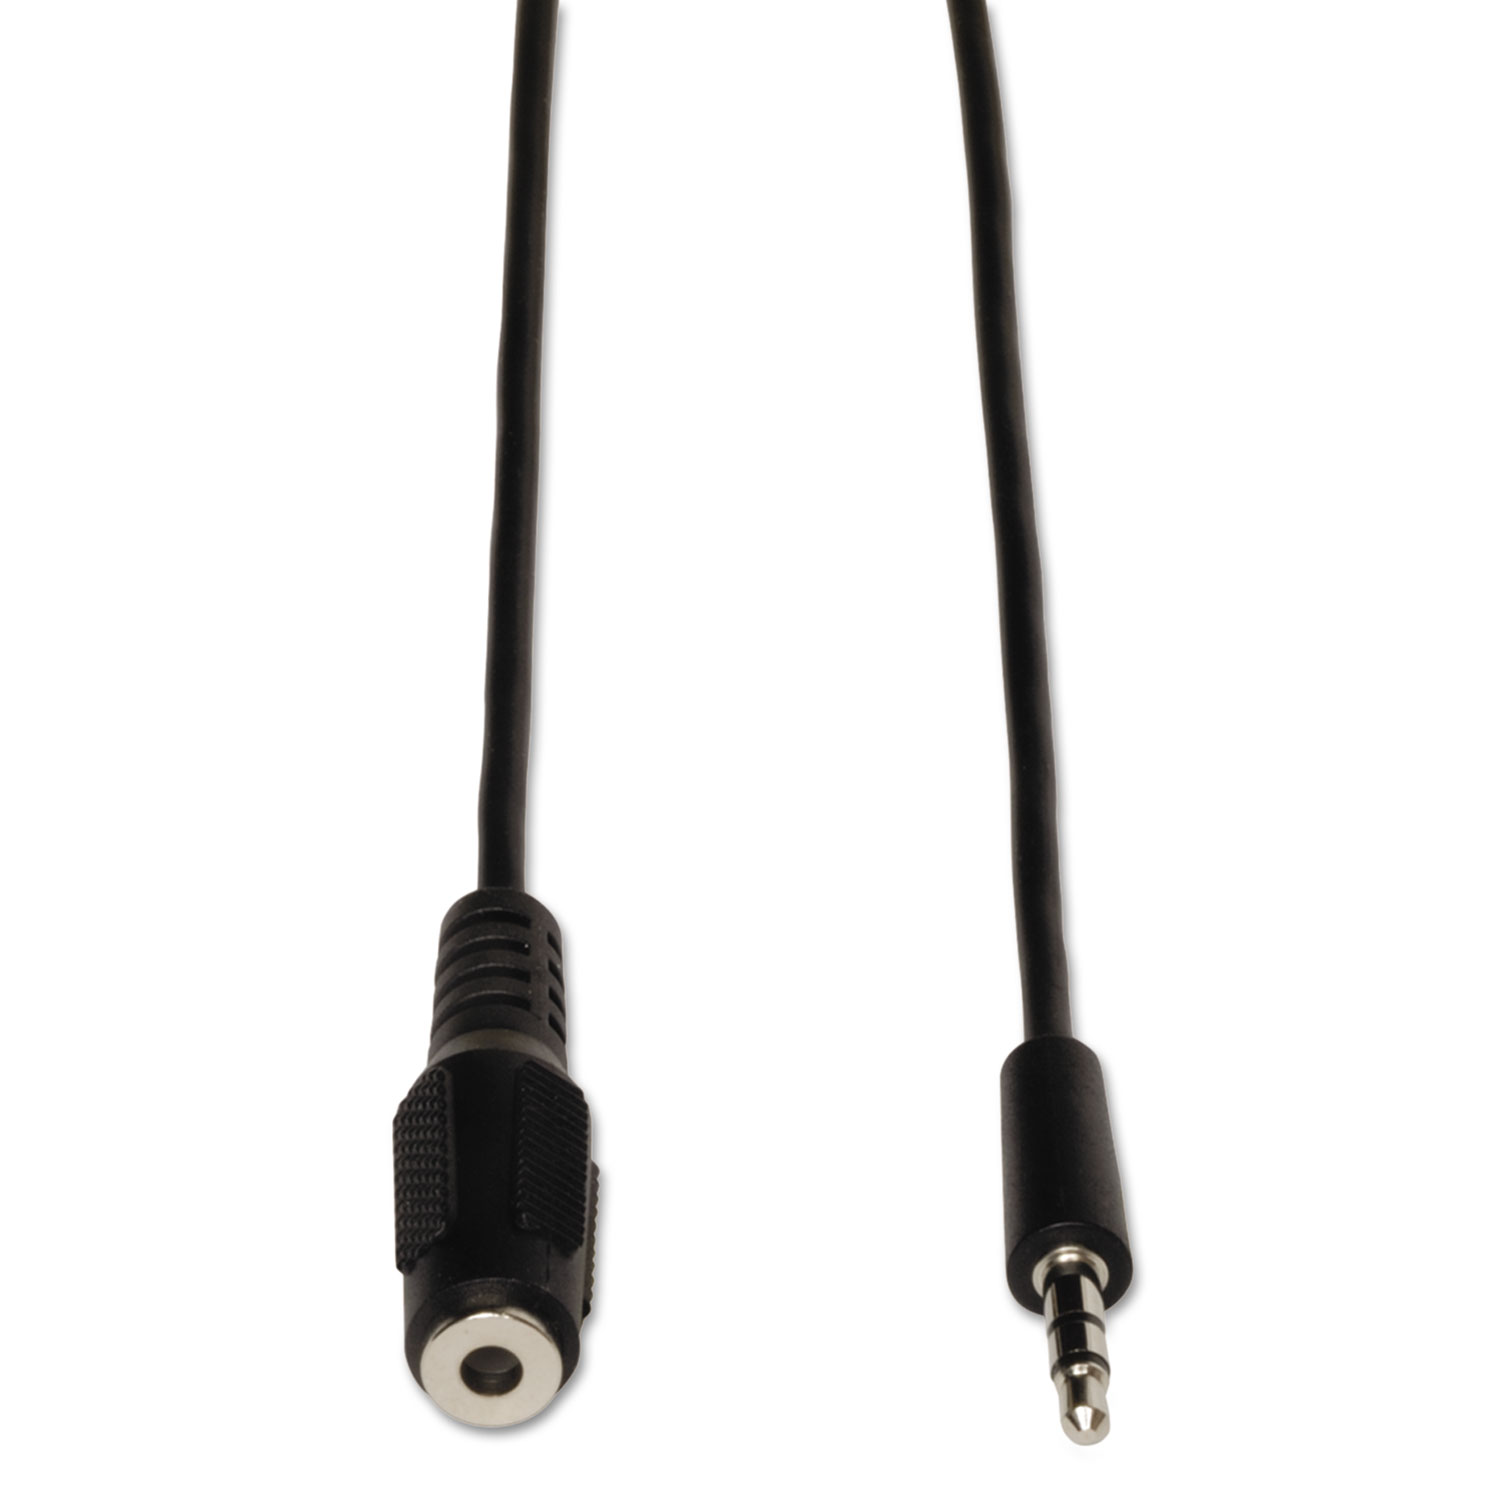 Audio Cables, 6 ft, Black, 3.5 mm Male; 3.5 mm Female